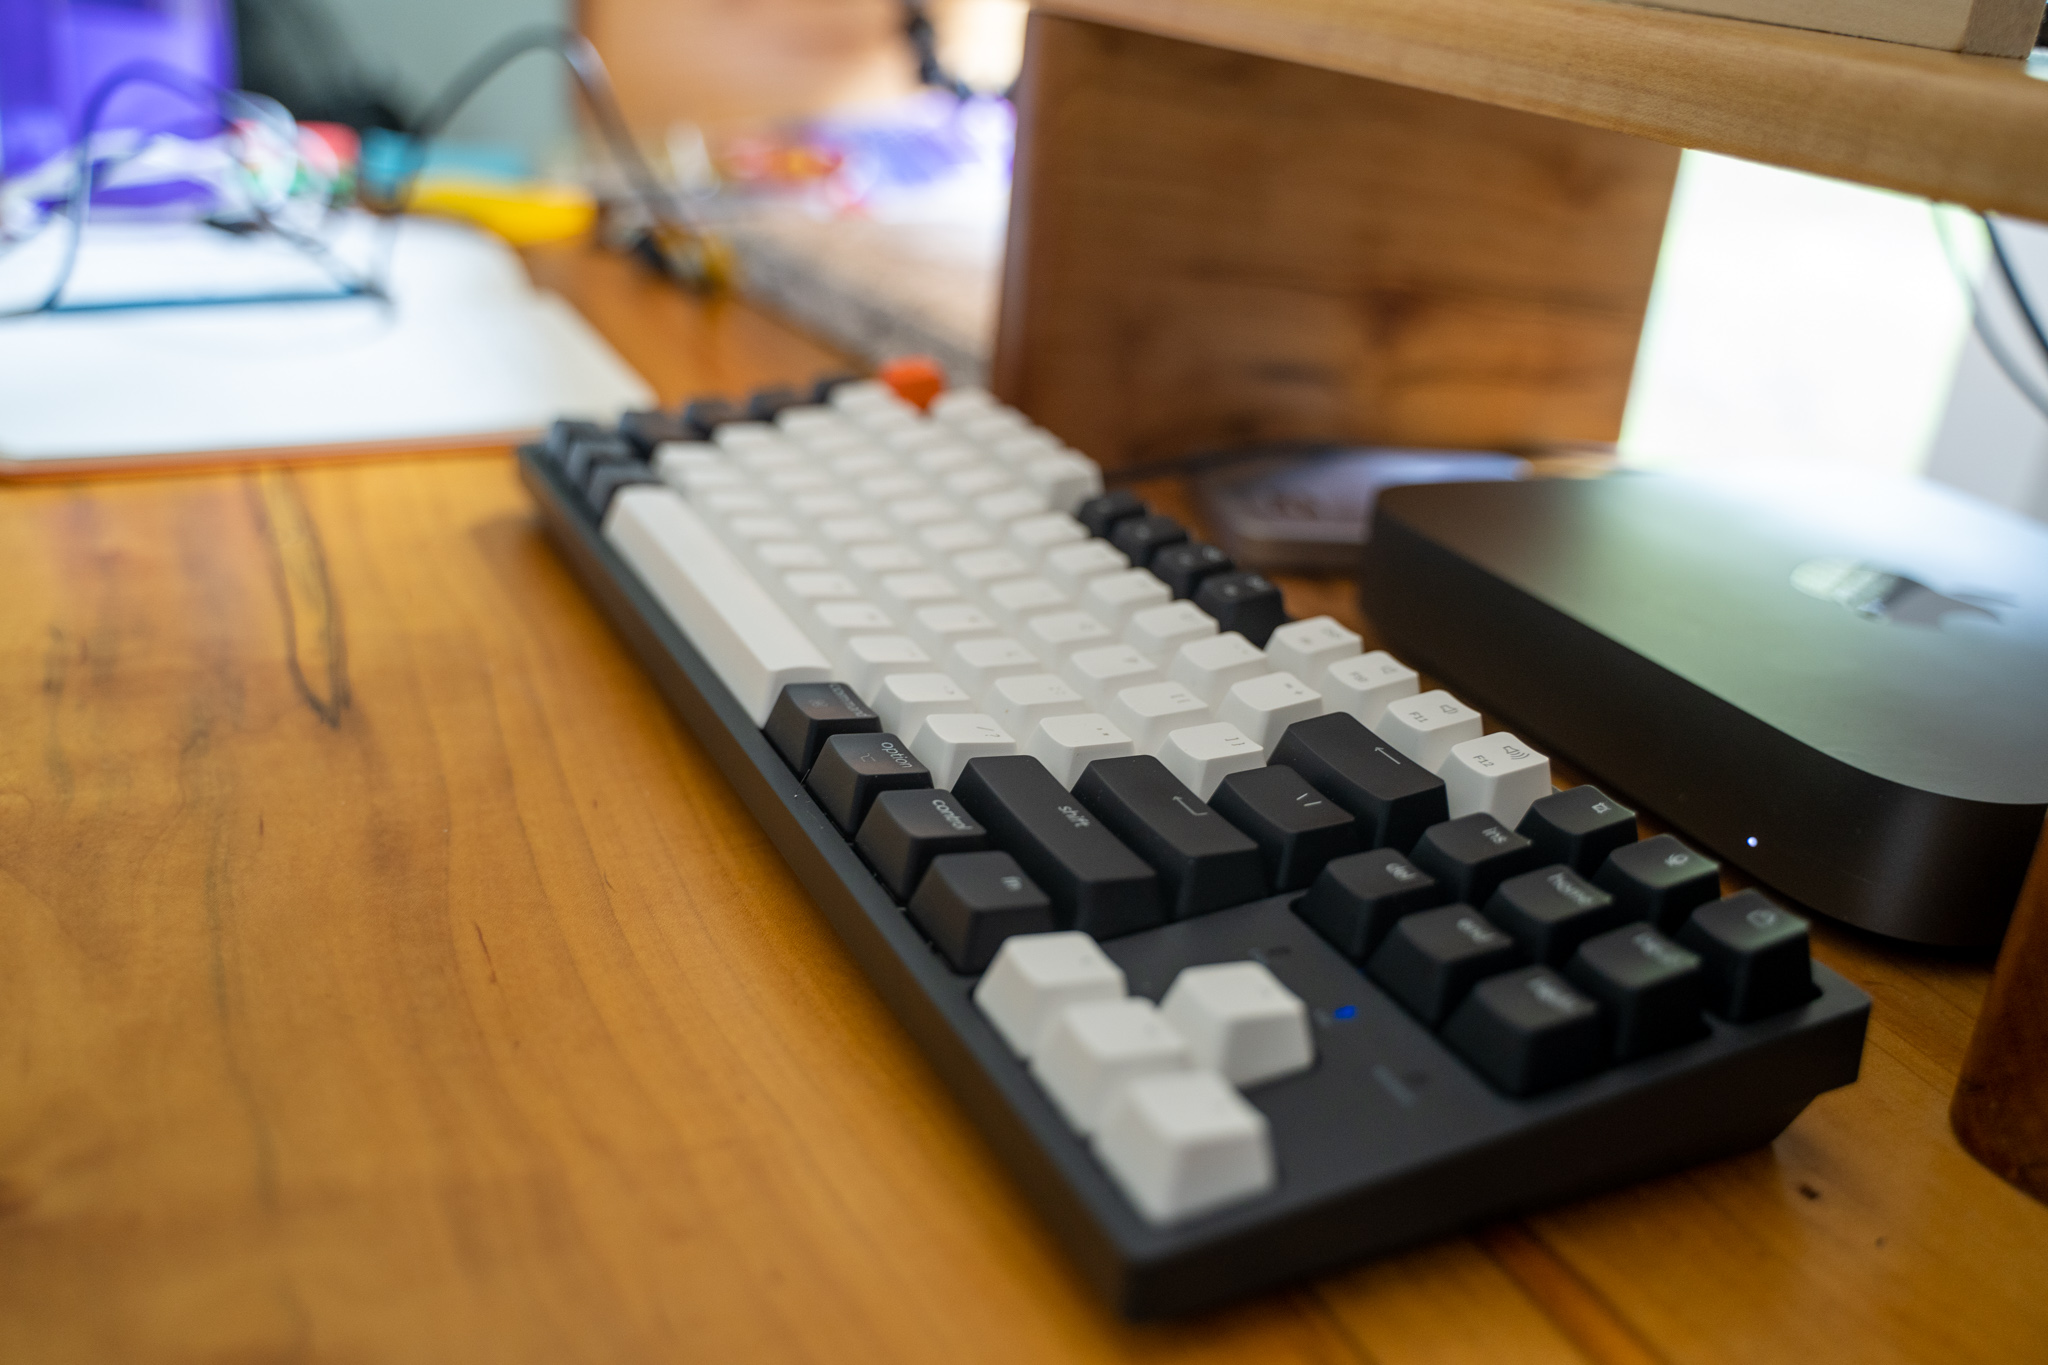 Keychron Keyboard K2 Review: Affordable Entry Level keyboard for